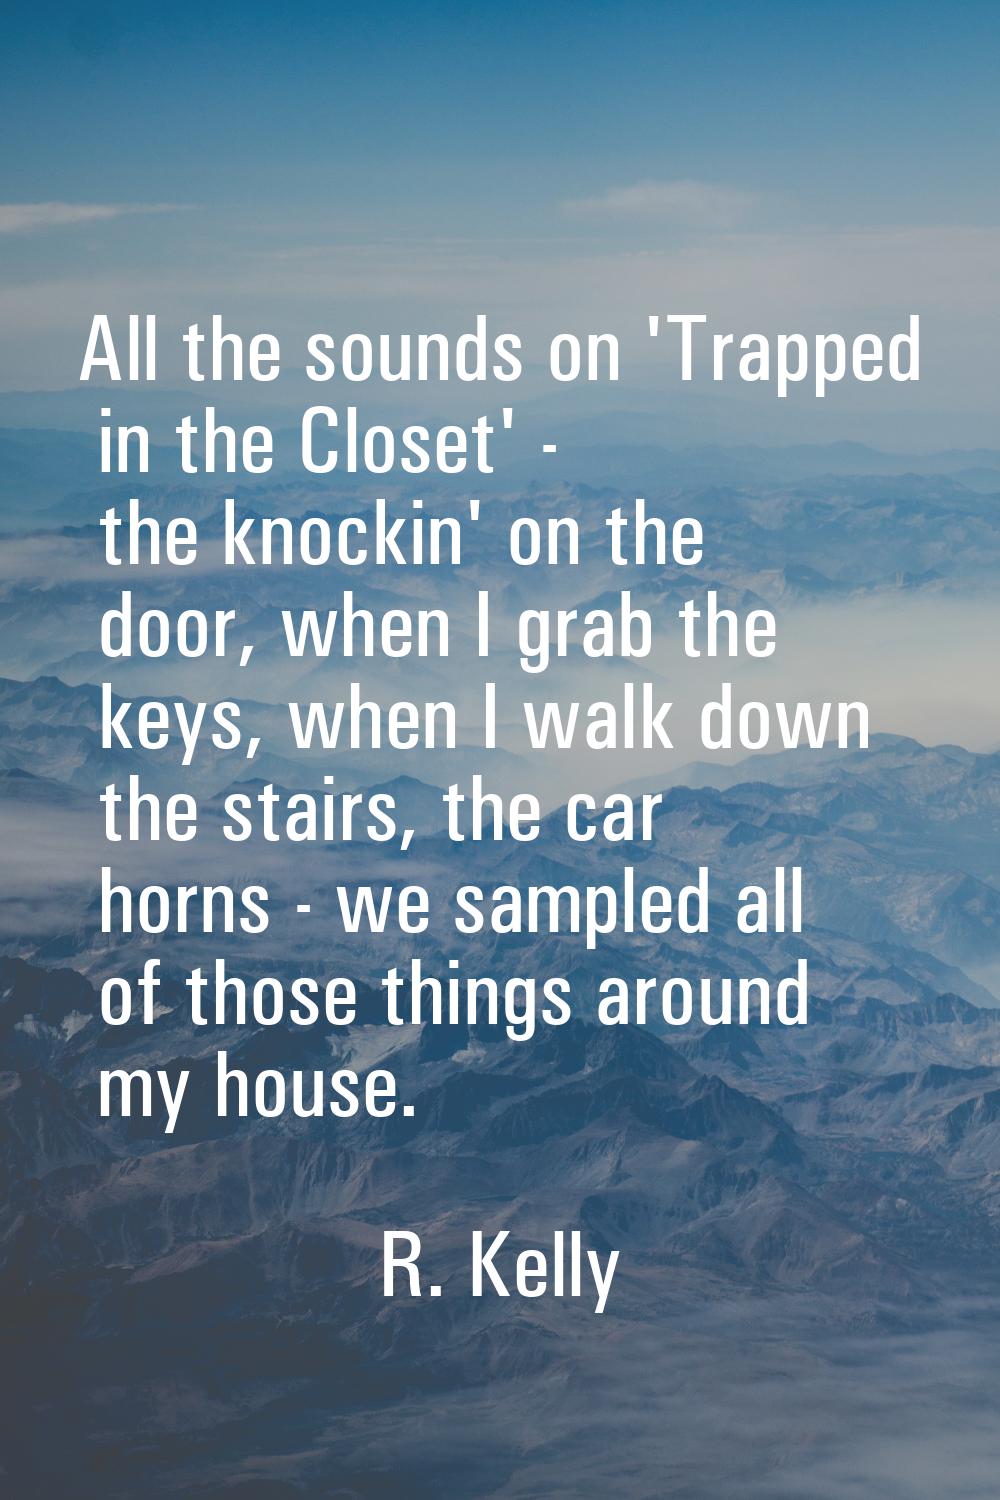 All the sounds on 'Trapped in the Closet' - the knockin' on the door, when I grab the keys, when I 